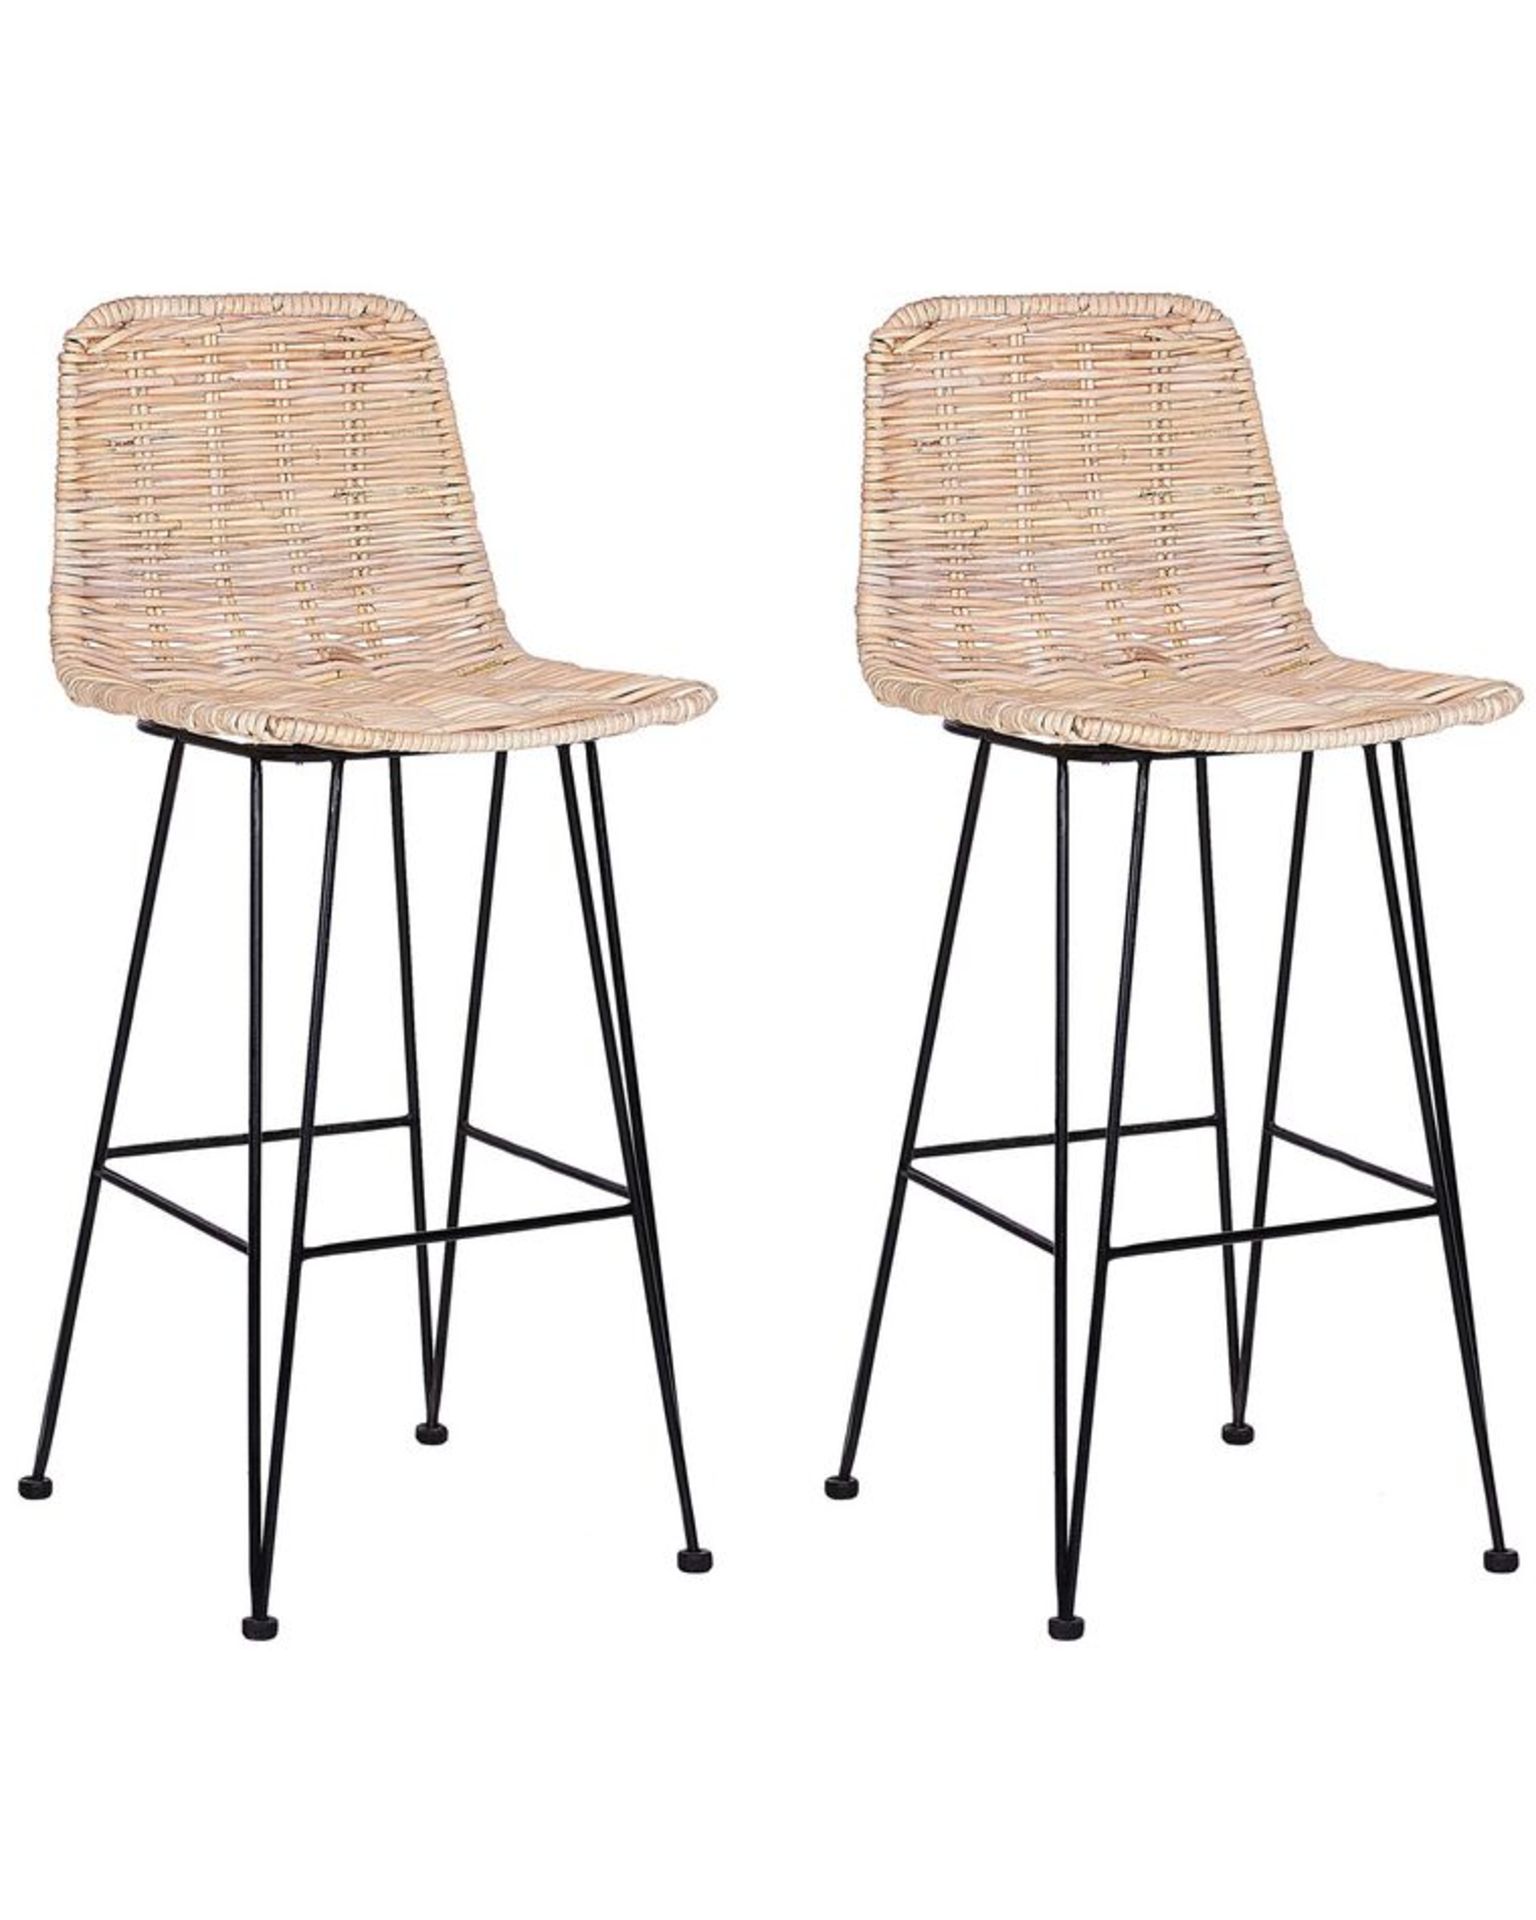 Cassita Set of 2 Rattan Bar Chairs Natural . - R14.15. RRP £369.99. Upgrade the looks of your